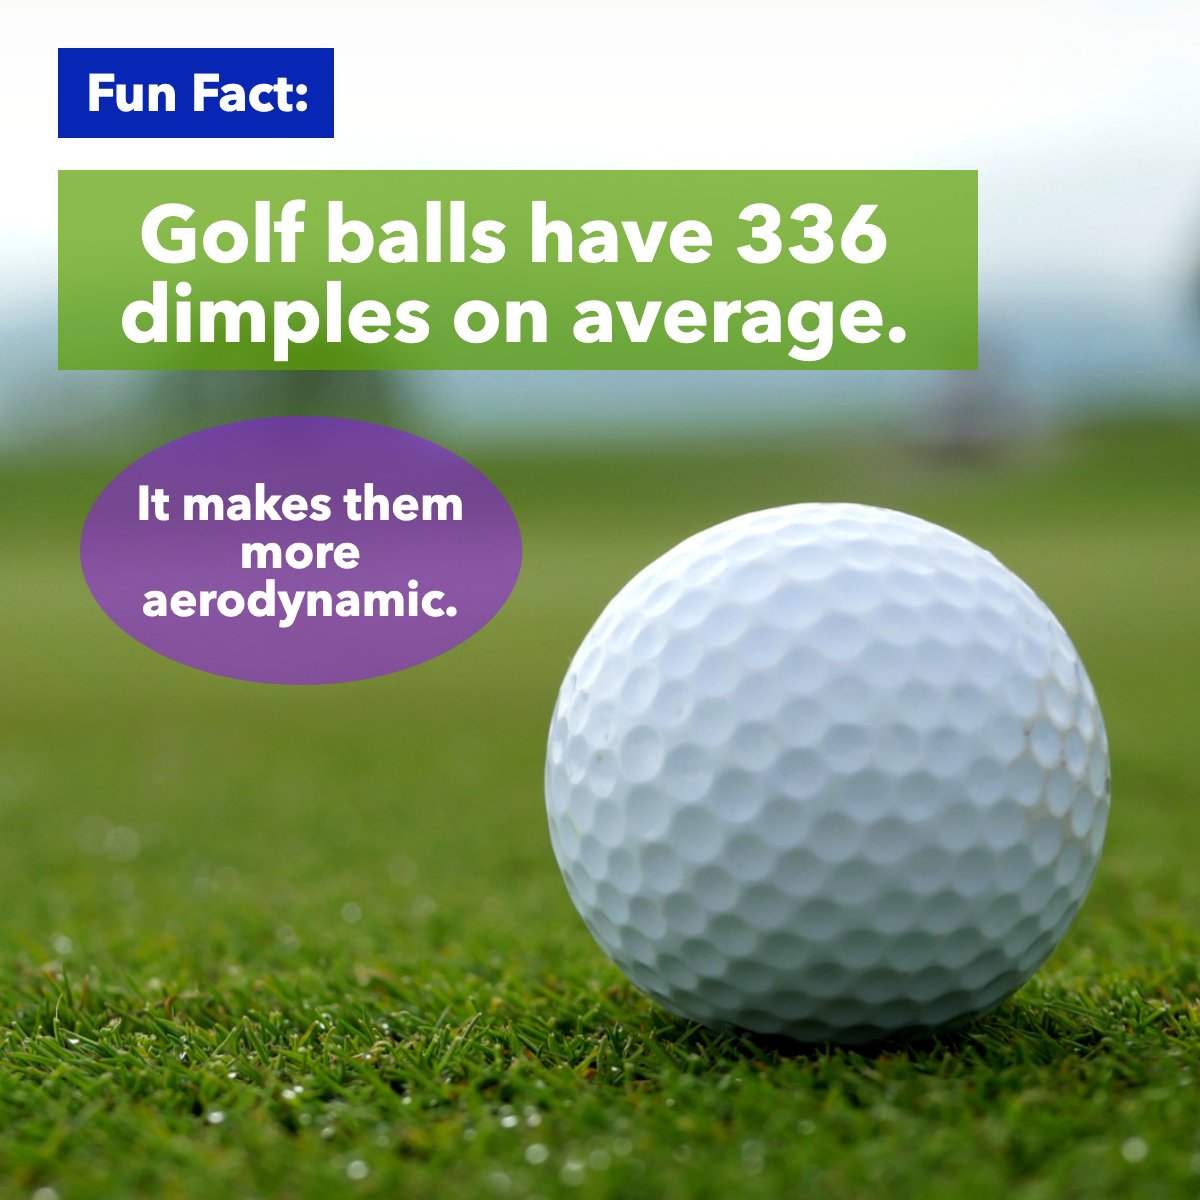 Did you know this? 😅

#golf  #fact  #balls  #sport
#justclosed #weloveourclients #homebuyers #homeowner #homeclosing #coloradospringsrealestate #coloradospringsrealtor #coloradosprings #colorado #coloradospringshomes #coloradohomes #movetocolorado